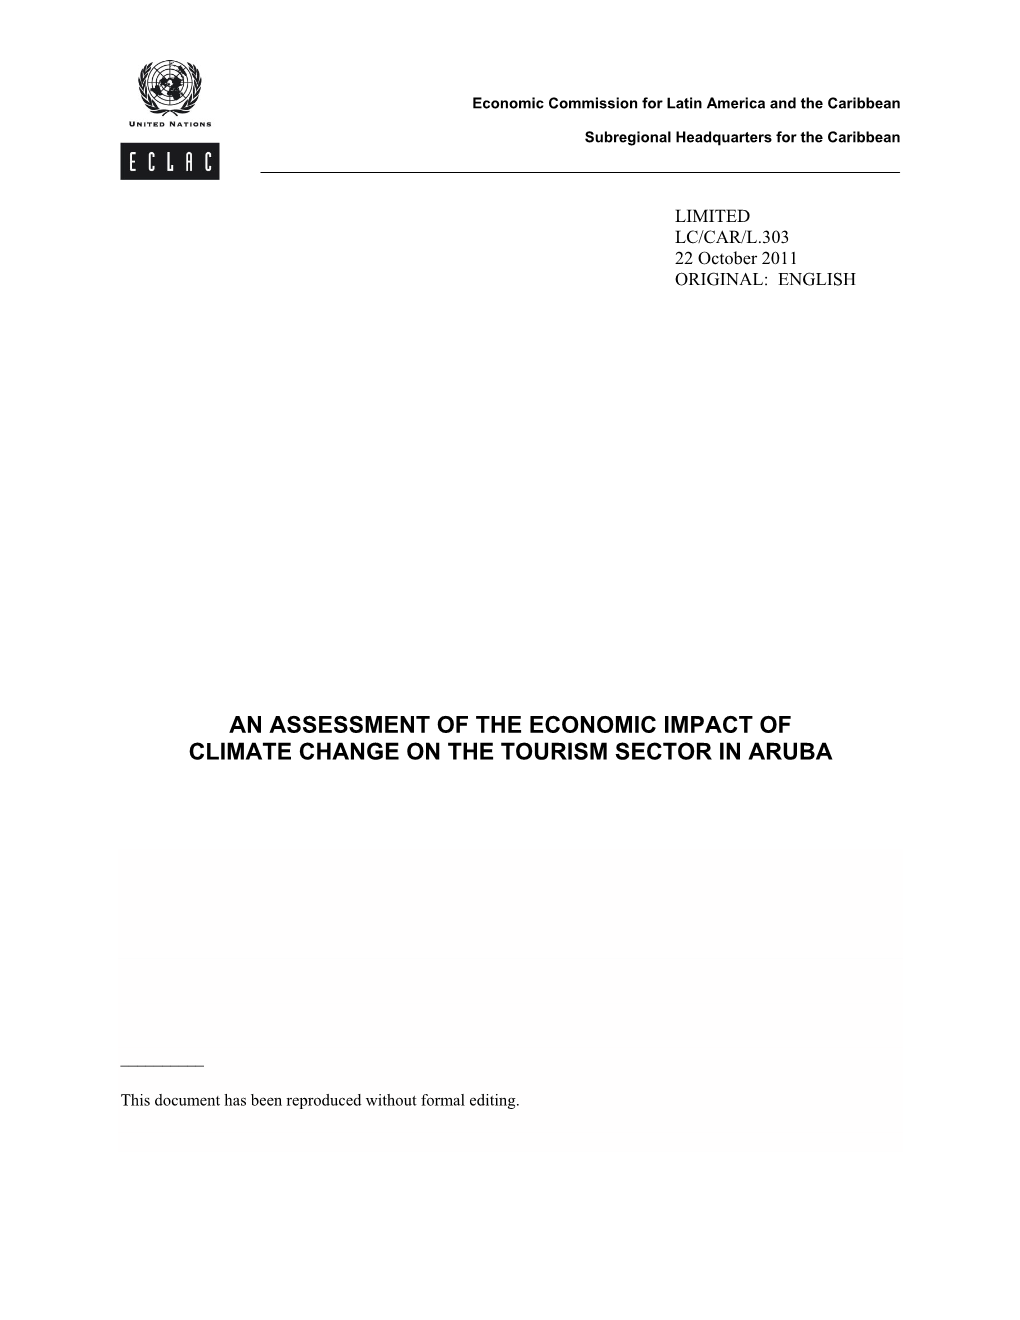 An Assessment of the Economic Impact of Climate Change on the Tourism Sector in Aruba